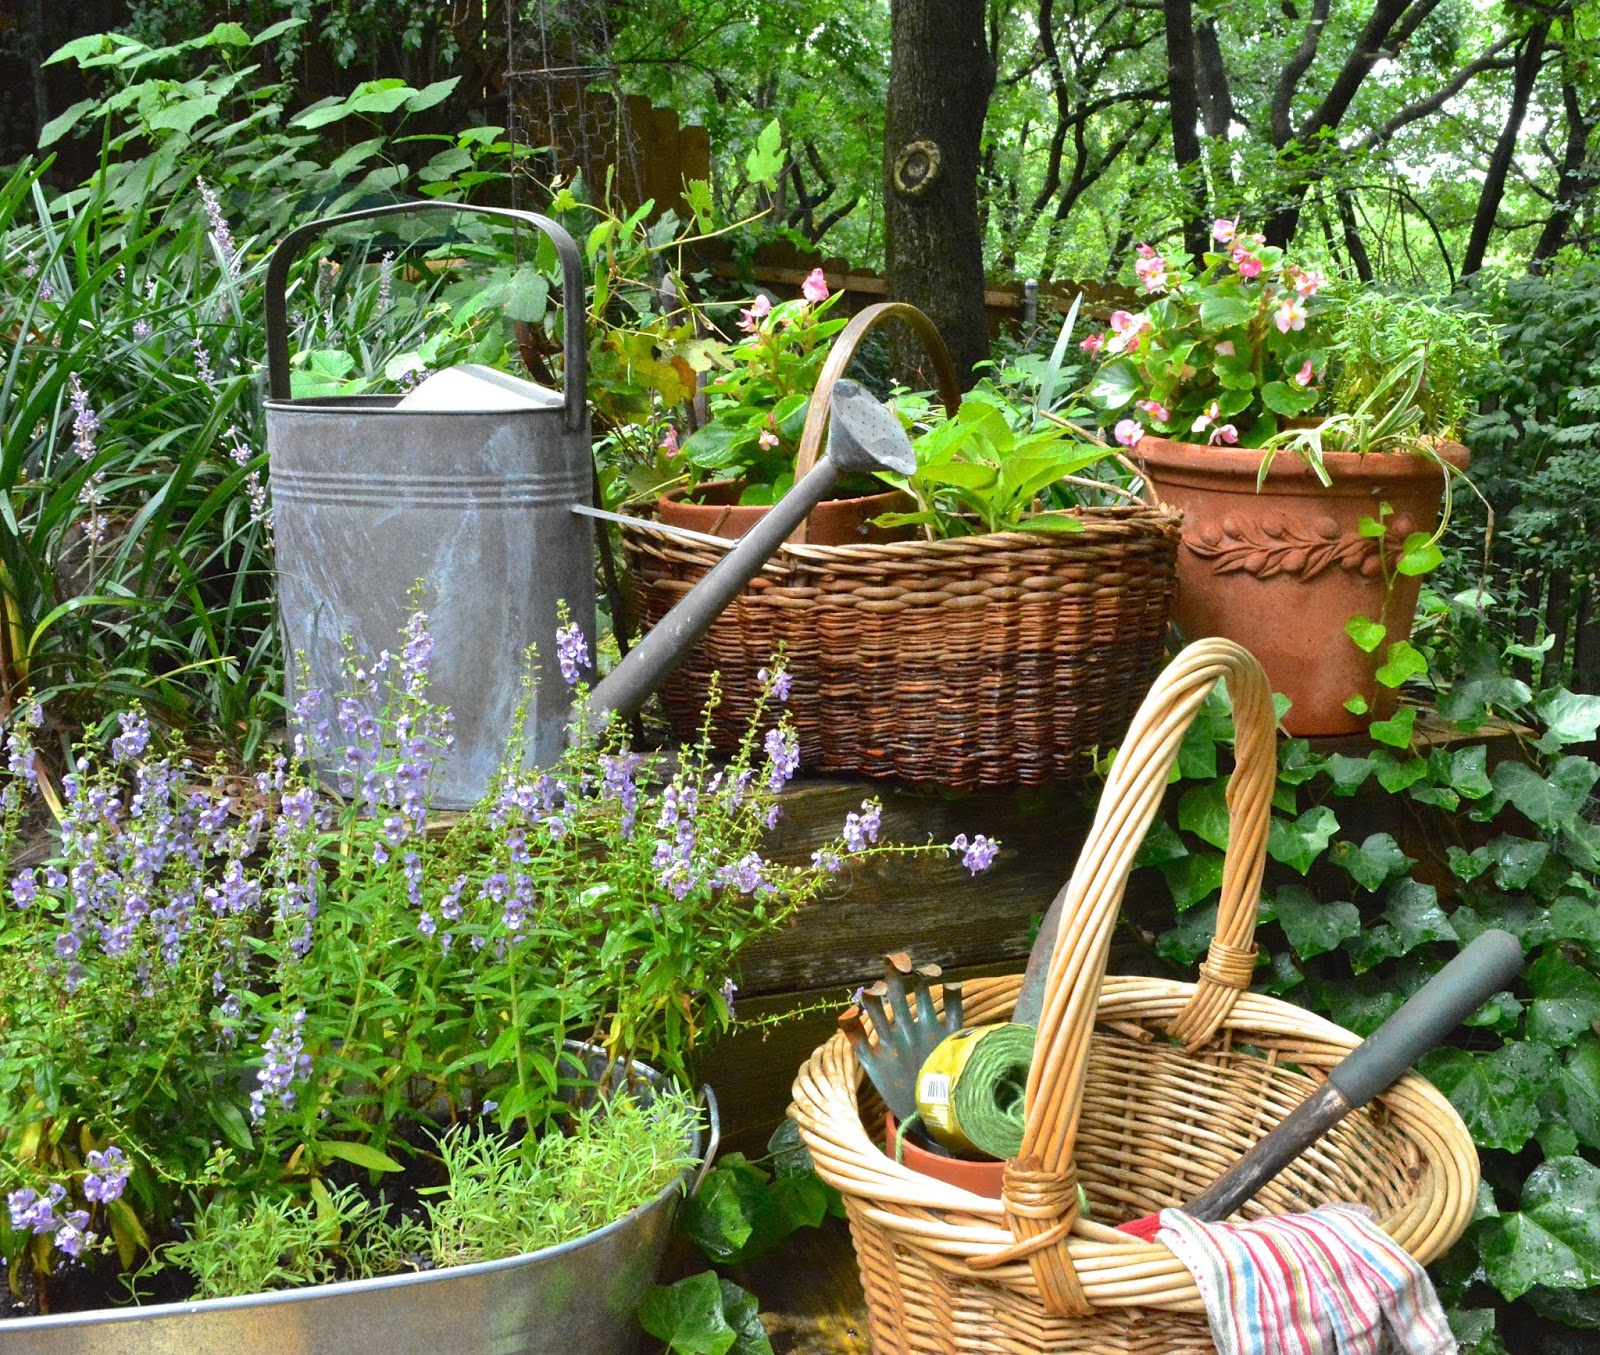 Let's Add Sprinkles: Baskets In The Garden/Lifestyle Of Love Blog Hop